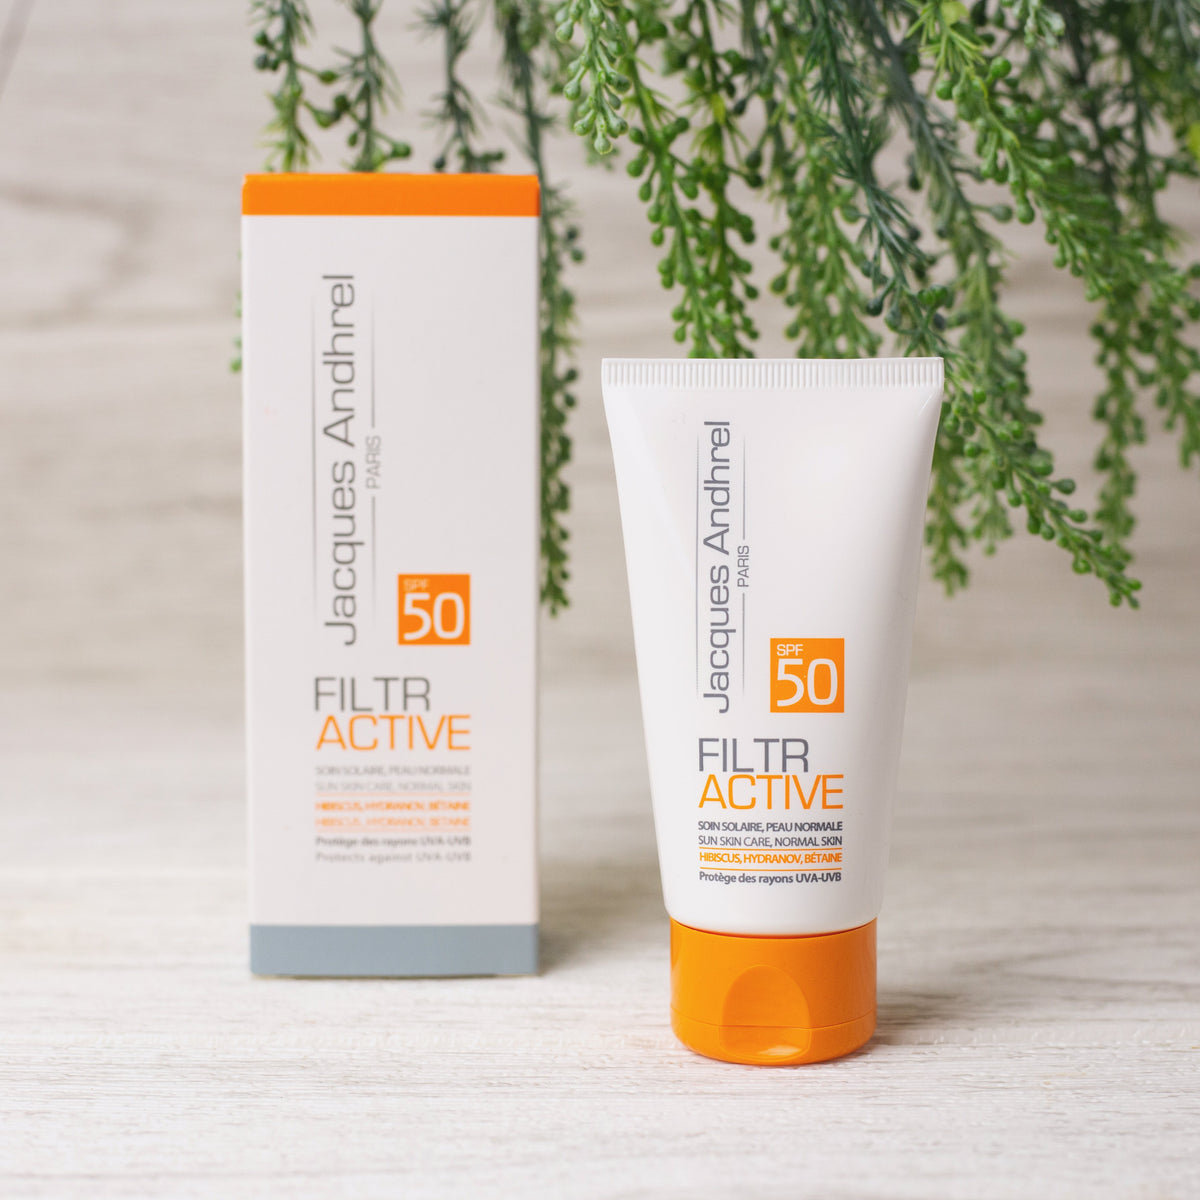 FILTR ACTIVE SPF 50 - Note Cosmetics Singapore